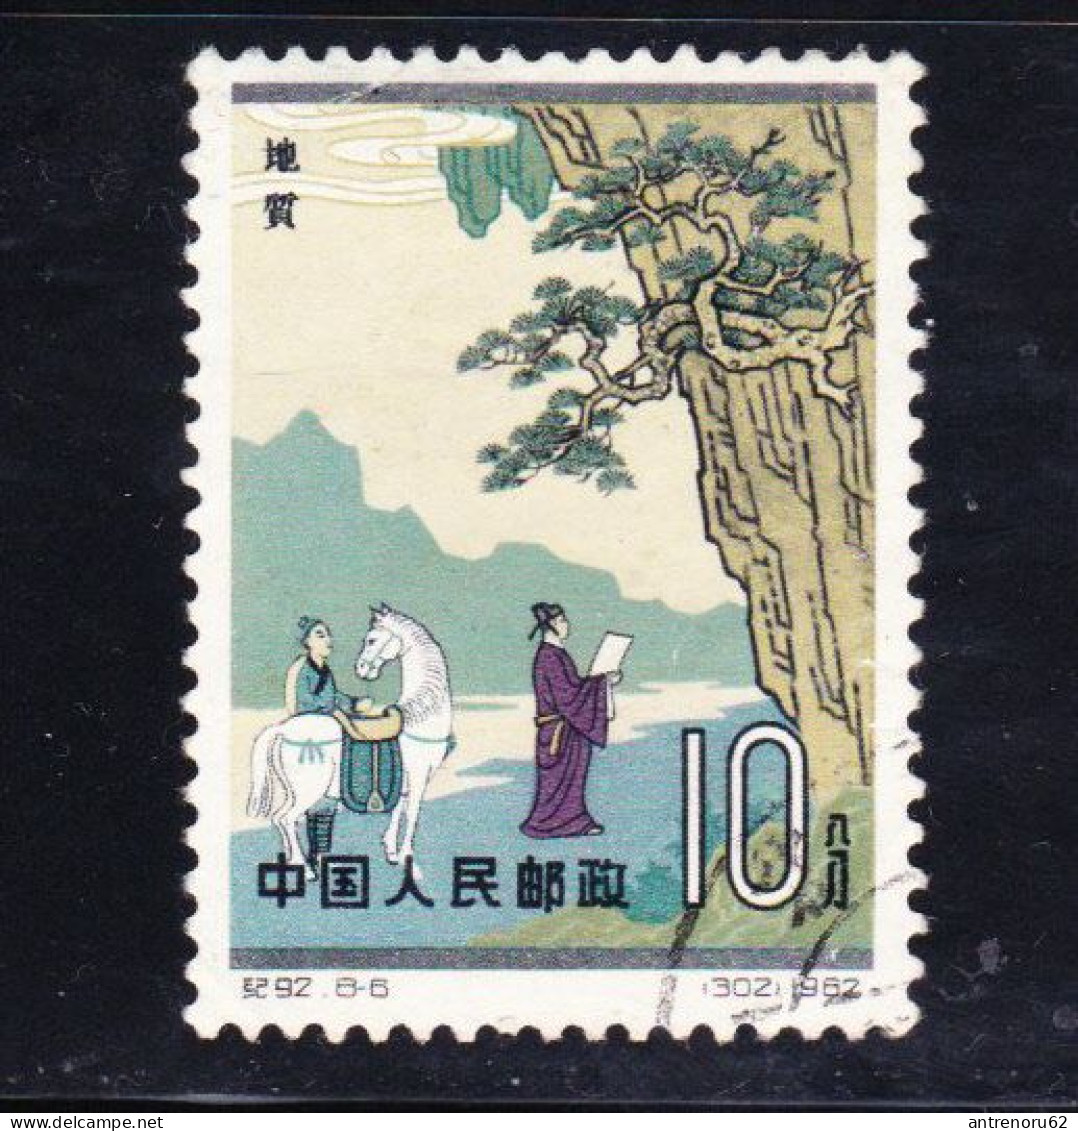 STAMPS-1962-CHINA-USED-SEE-SCAN - Oblitérés